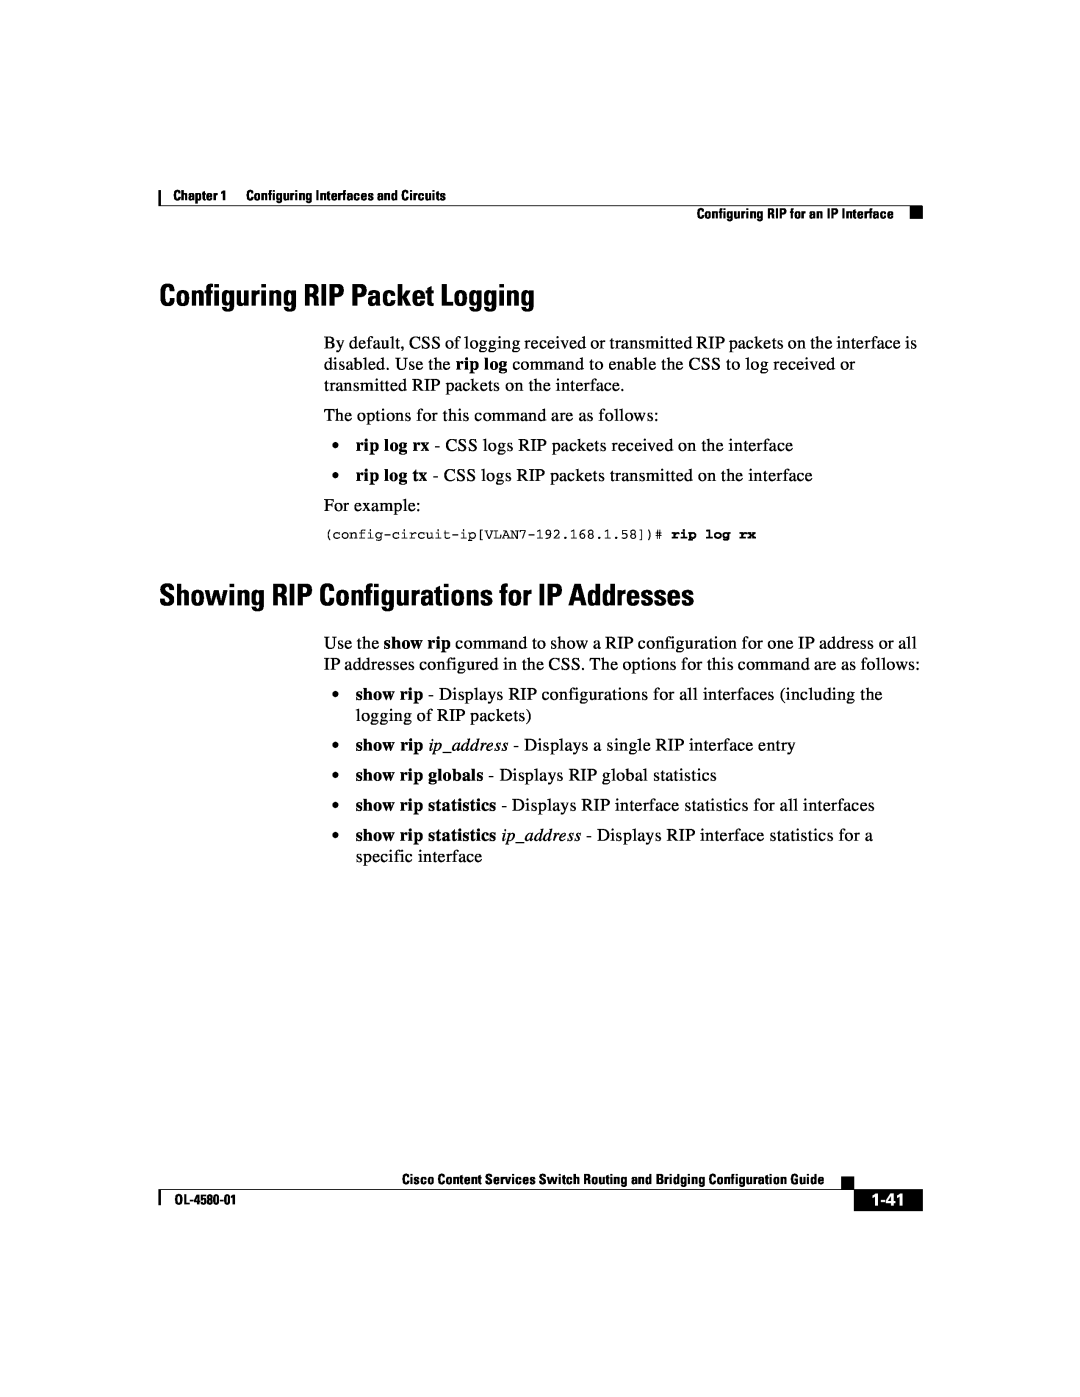 Cisco Systems OL-4580-01 manual Configuring RIP Packet Logging, Showing RIP Configurations for IP Addresses, 1-41 